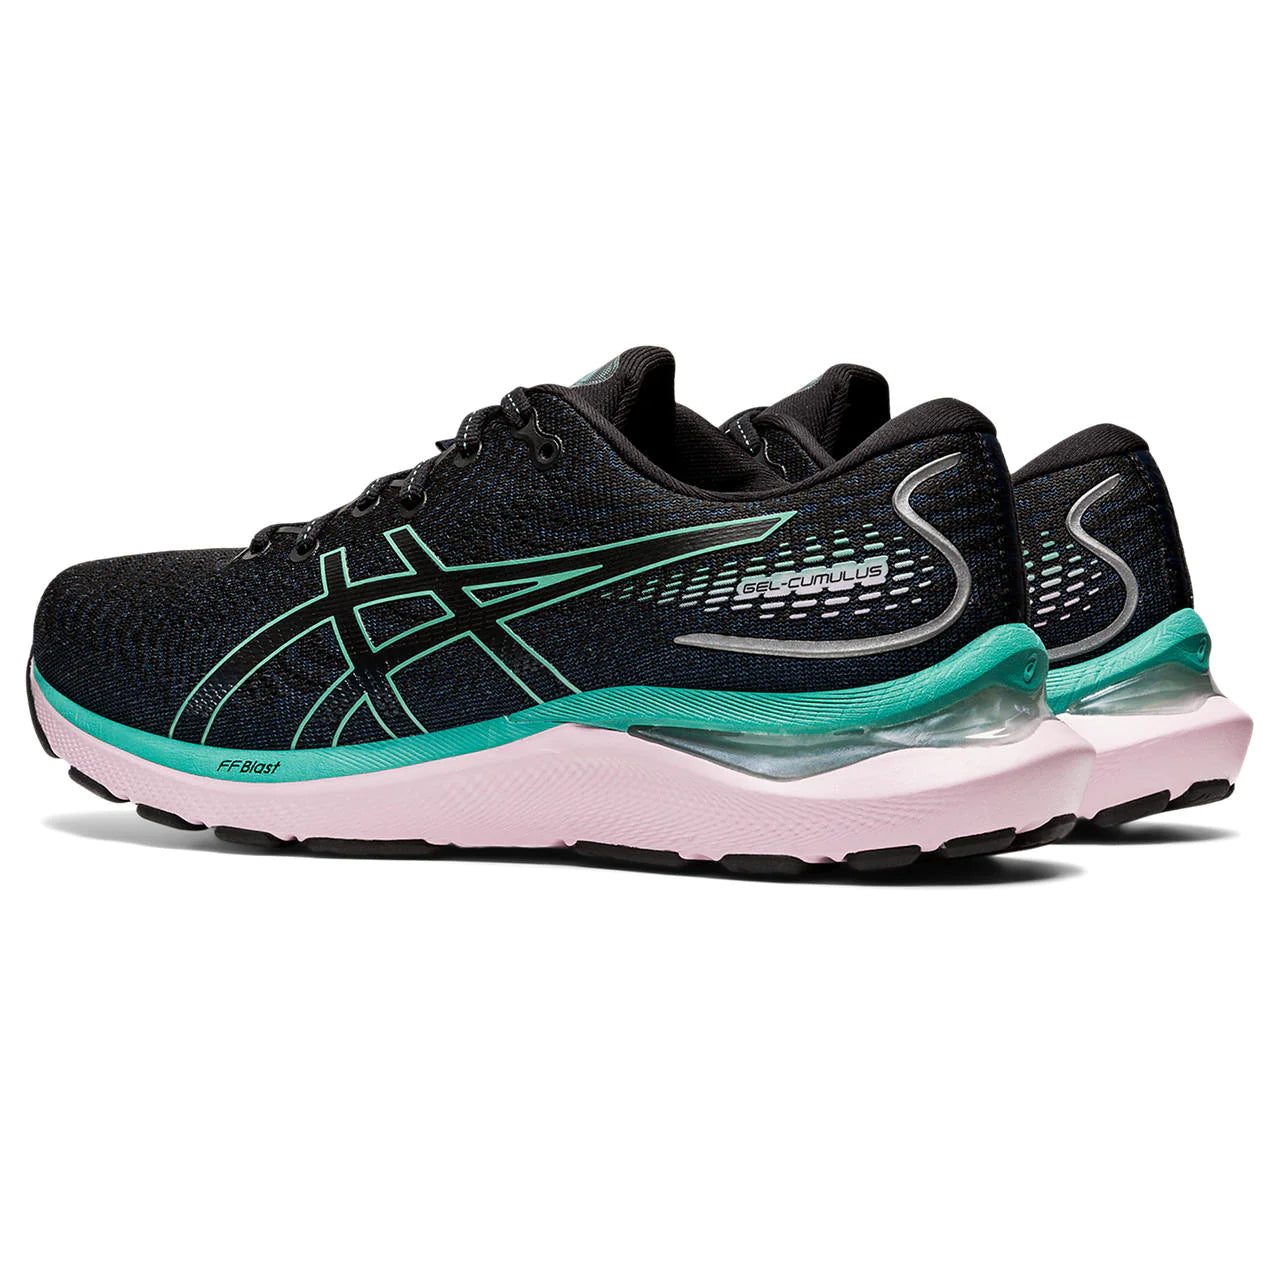 Back angled view of the Women's Gel Cumulus 24 by ASIC in the color Black/Sage